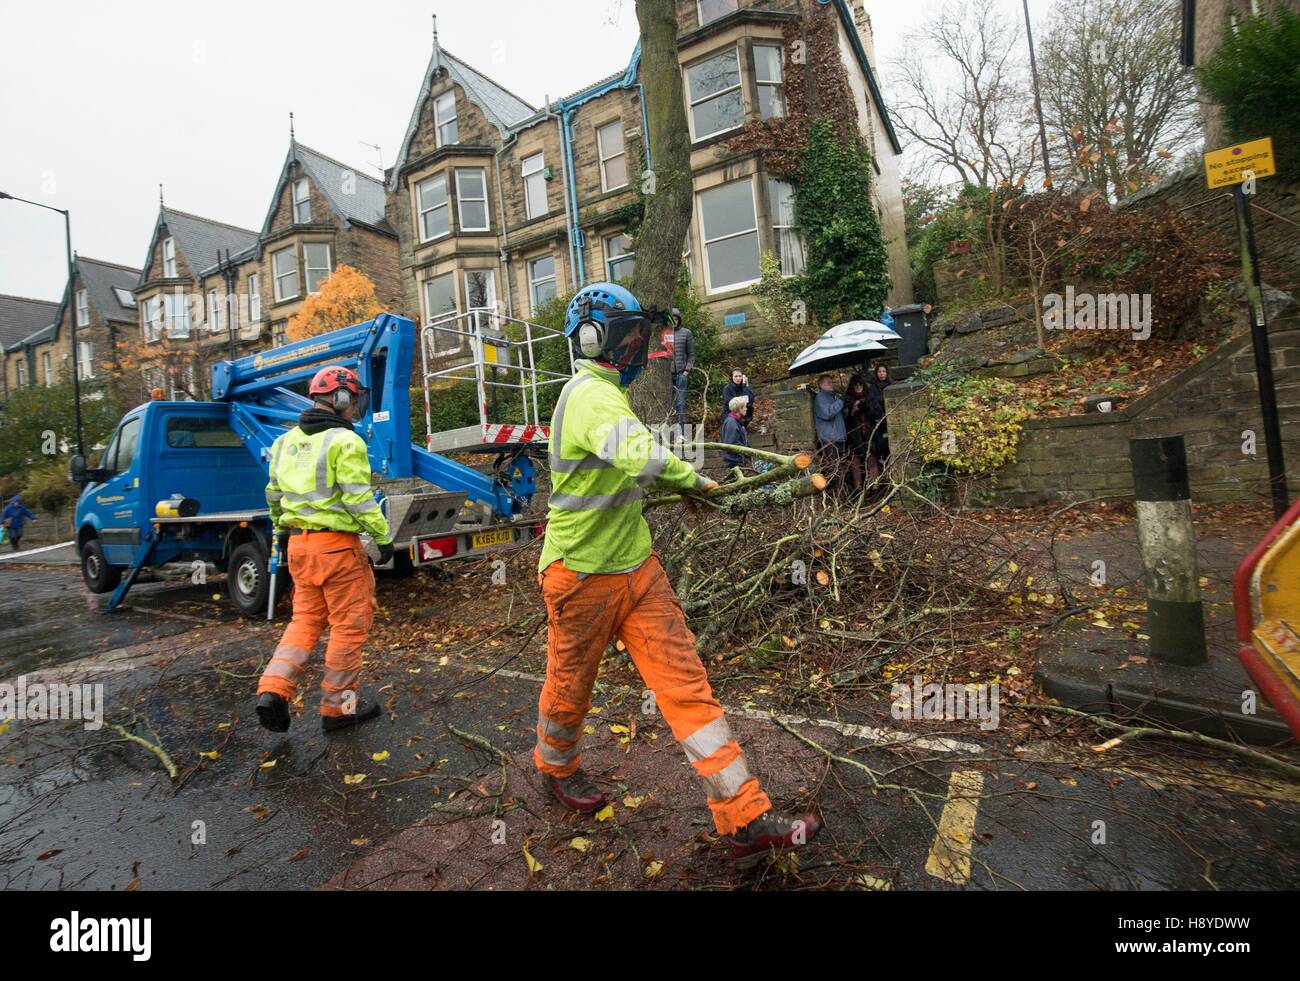 Members of the public look on as contractors cut down a tree in Rustlings Road, where three people protesting against a controversial tree felling programme have been arrested after council contractors started cutting down trees with chainsaws before dawn. Stock Photo